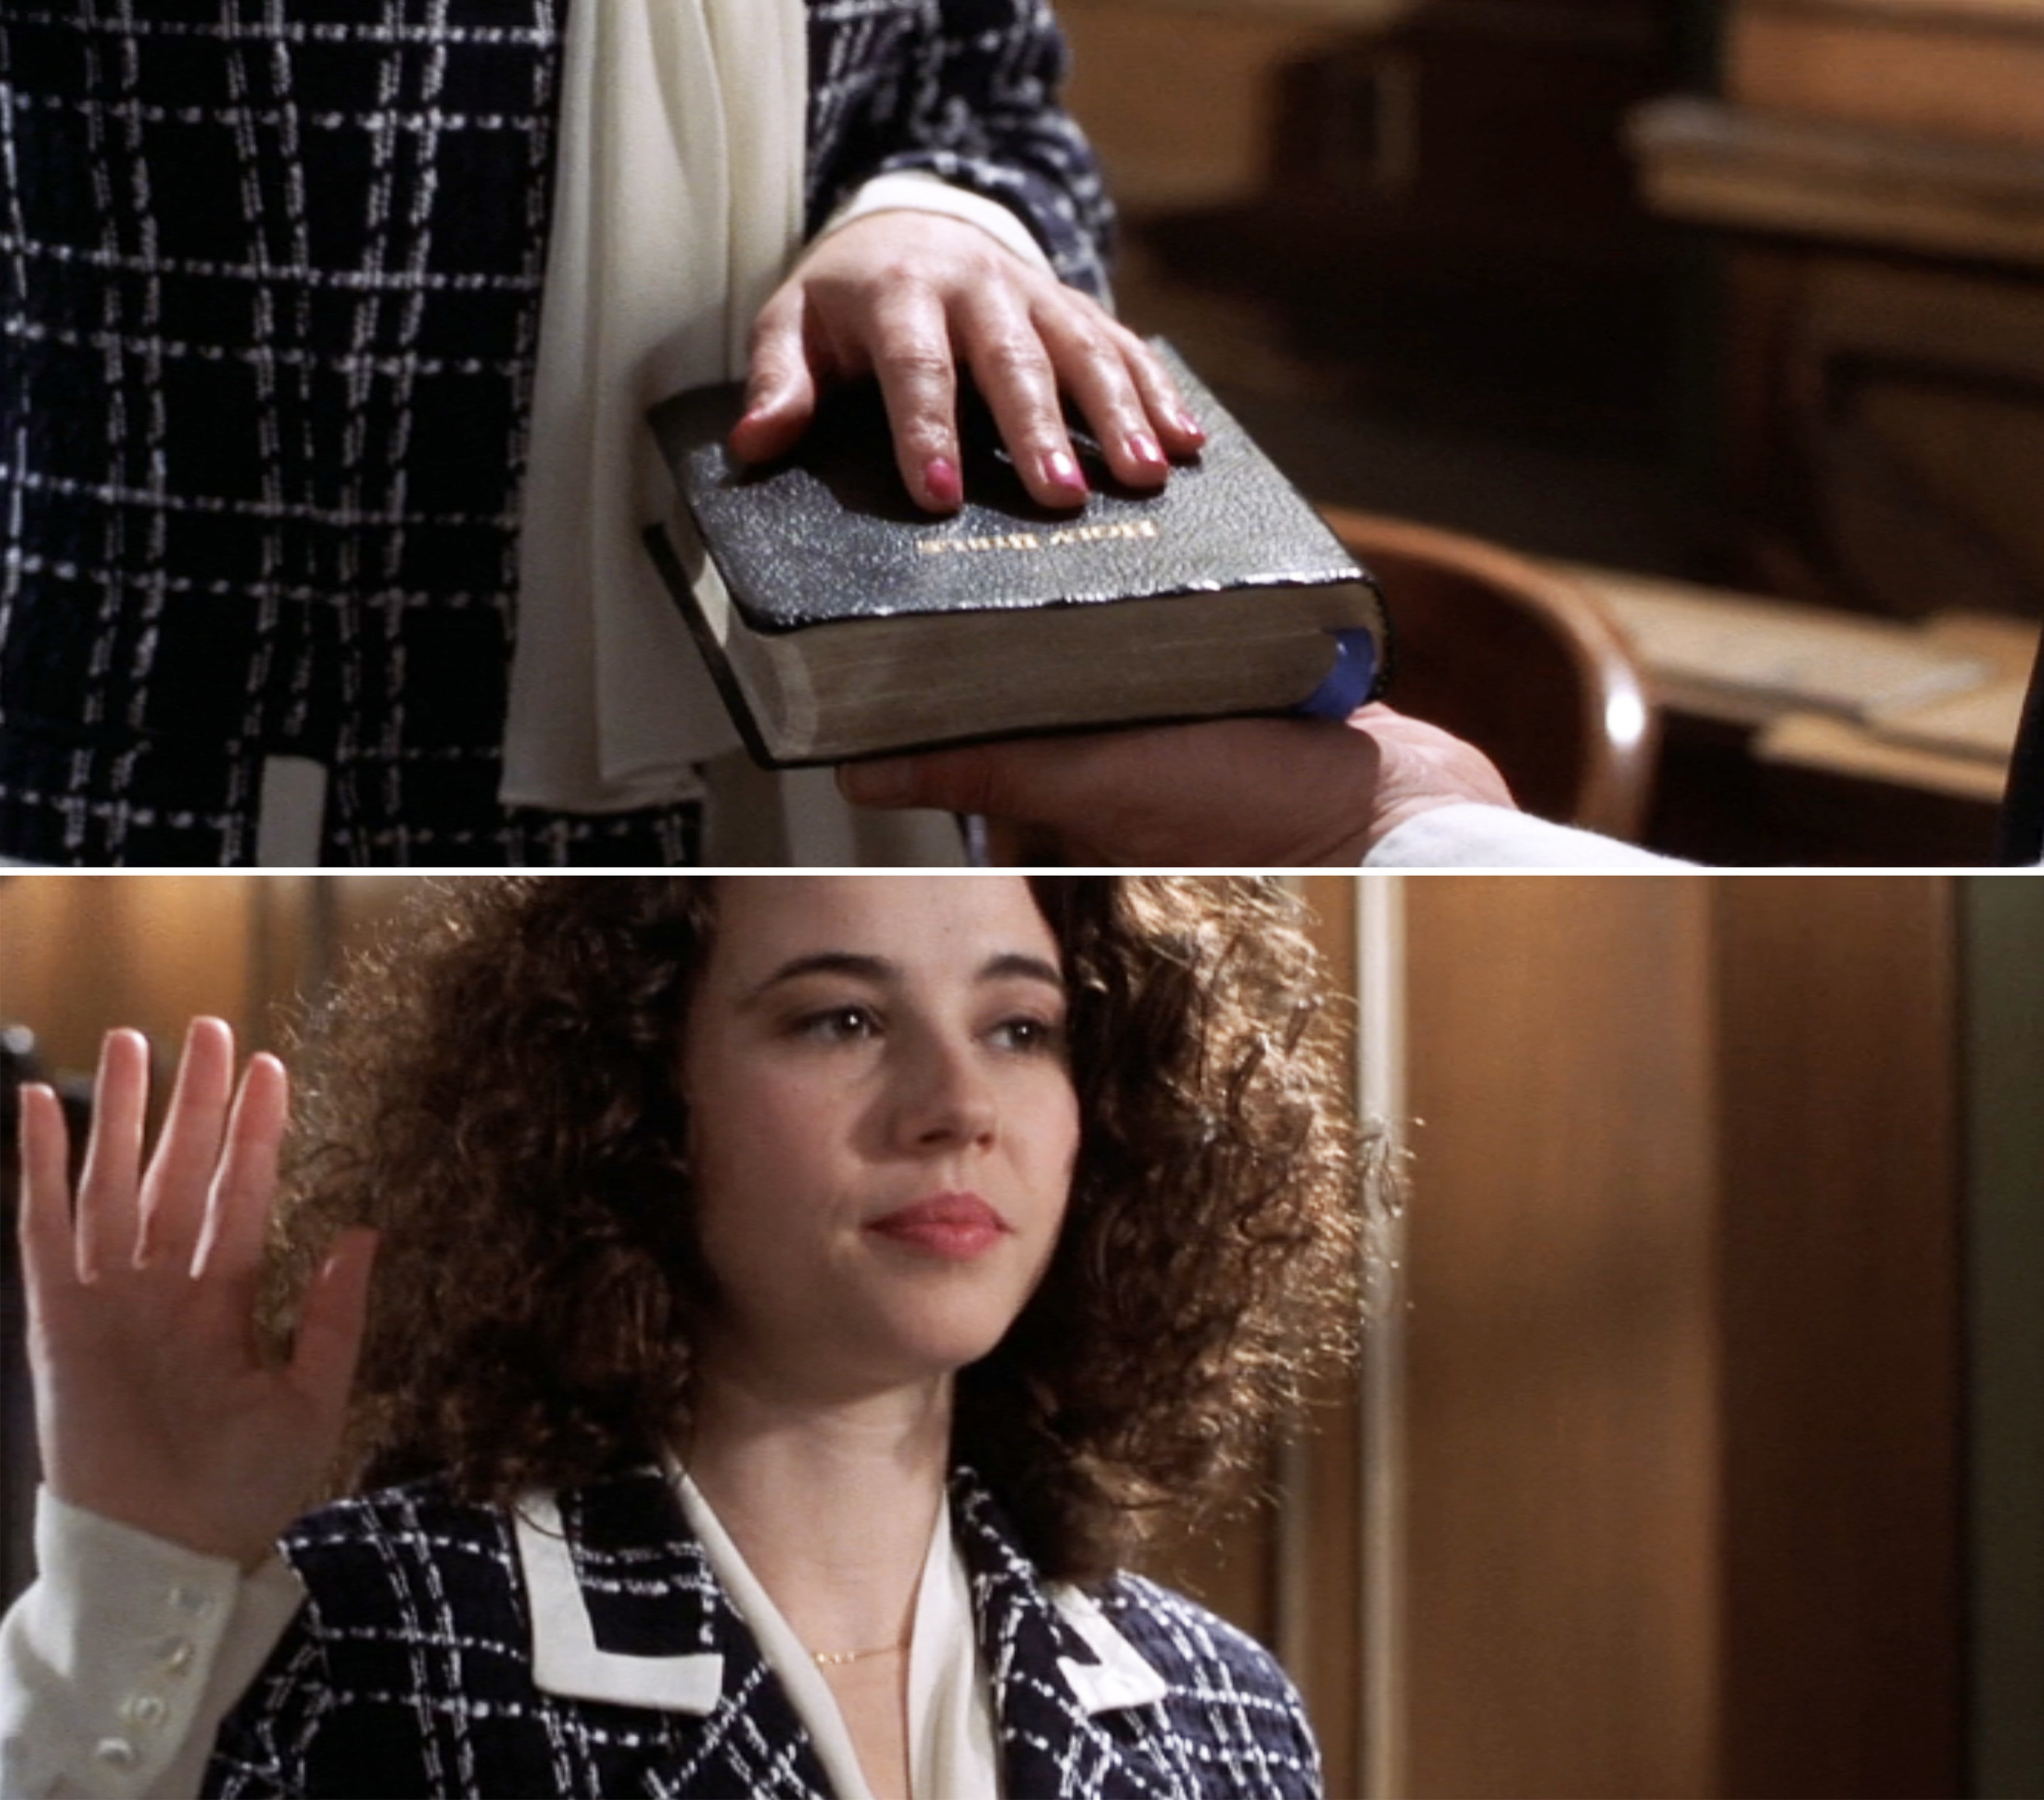 Linda with her hand on the Bible in courtroom scene from Legally Blonde